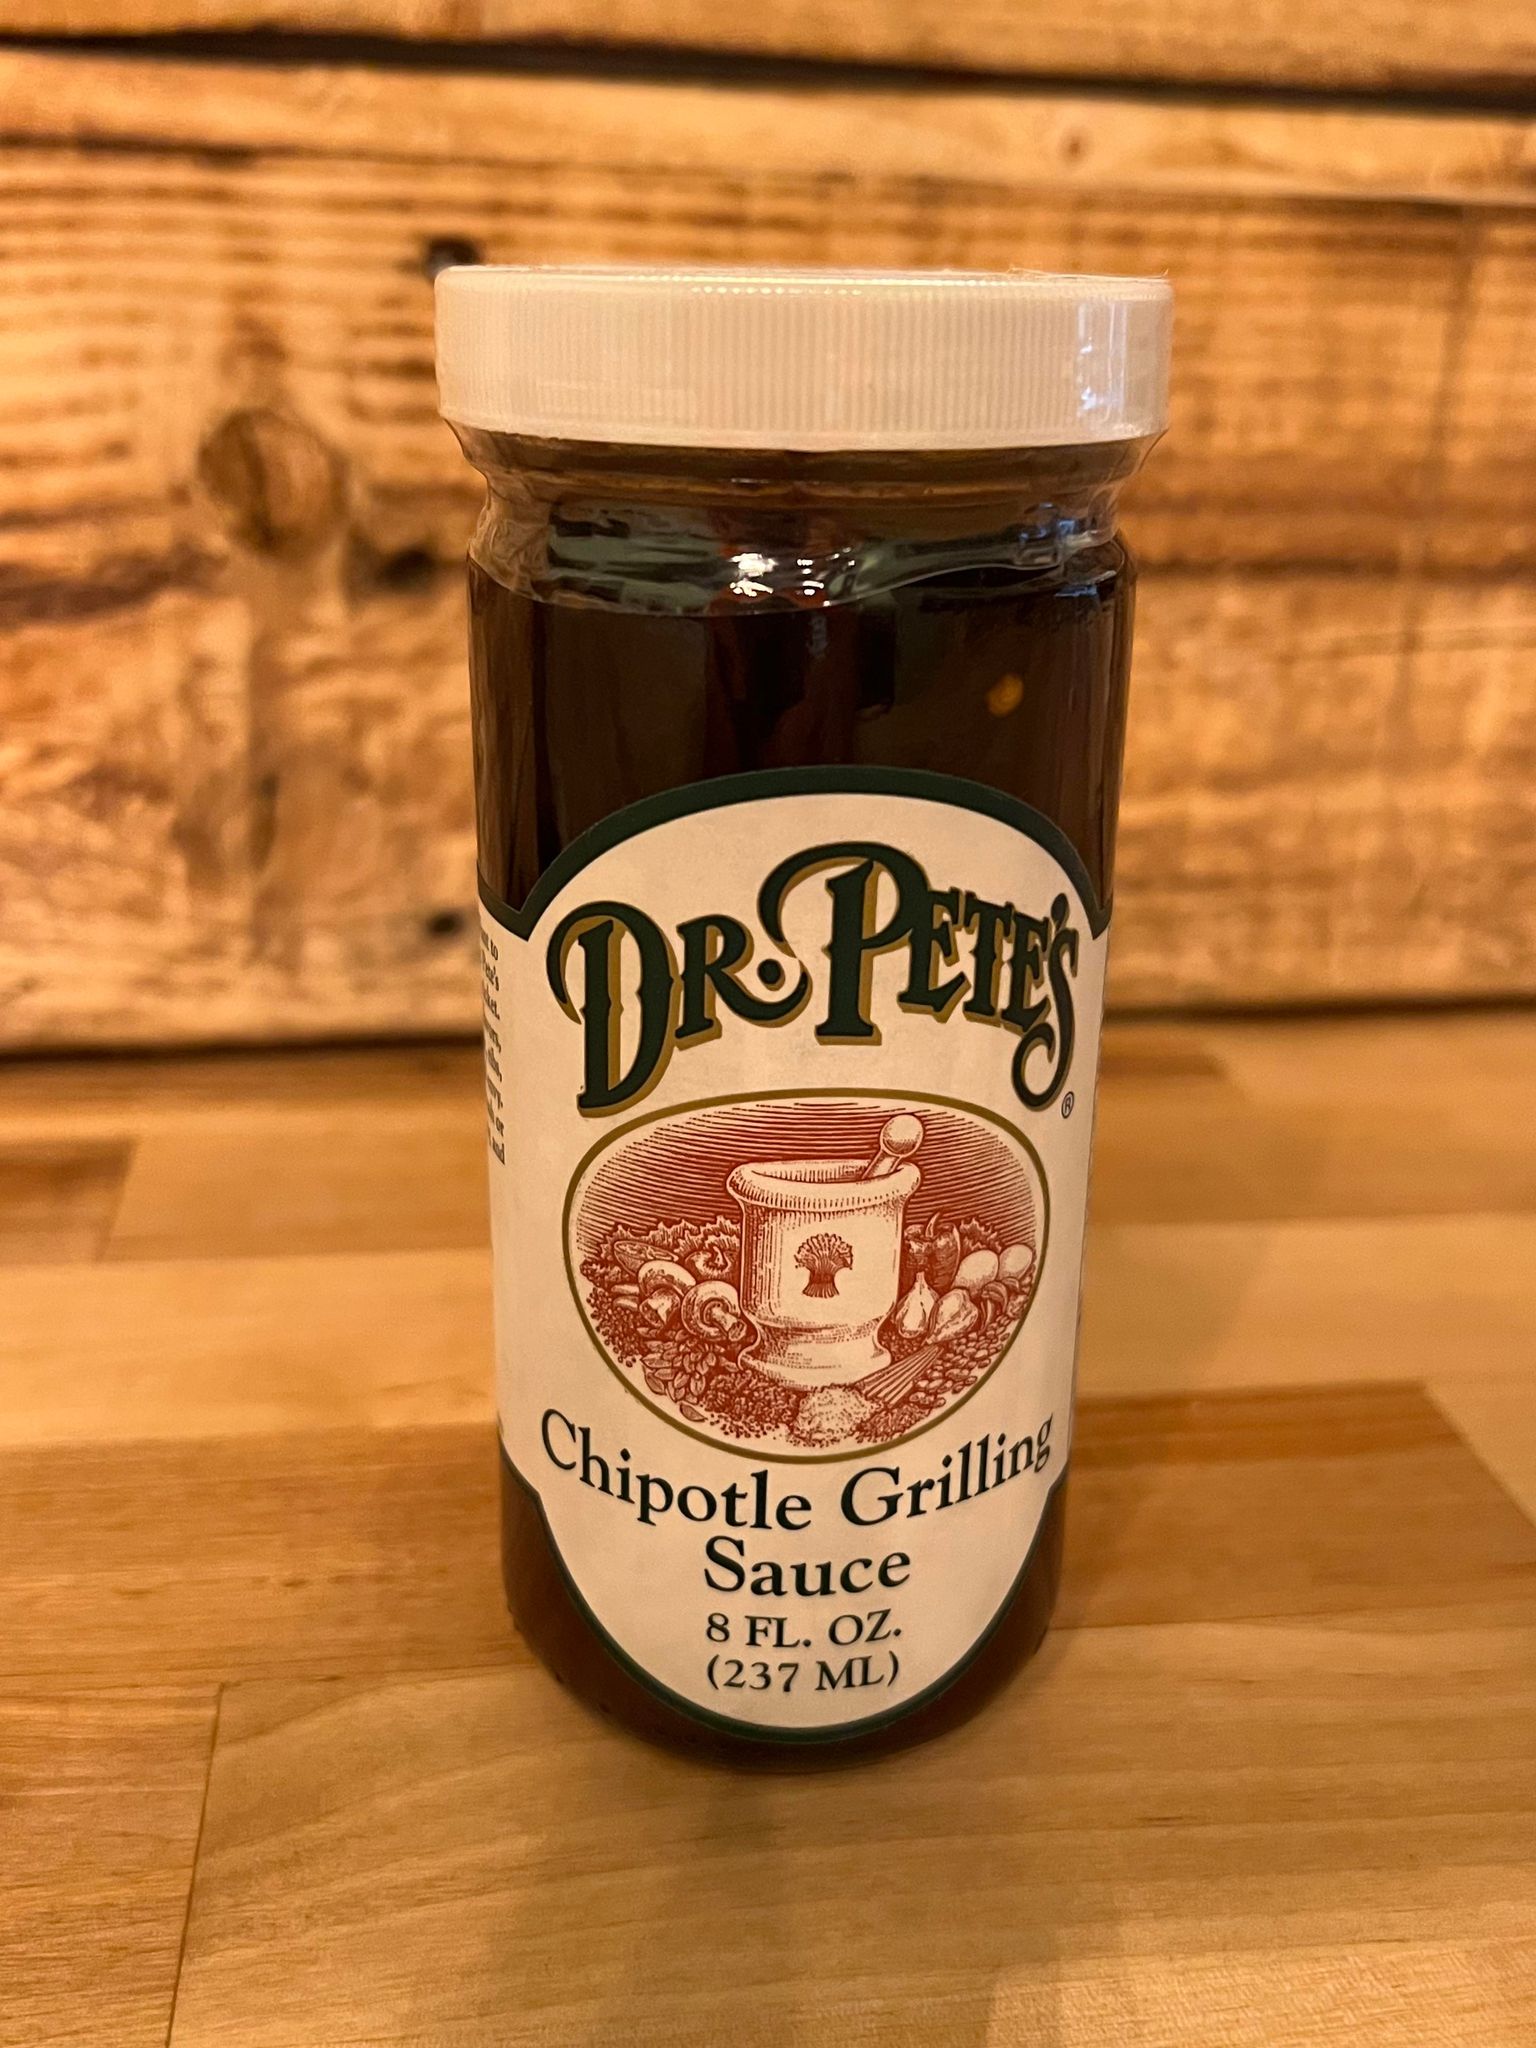 Chipotle Grilling Sauce